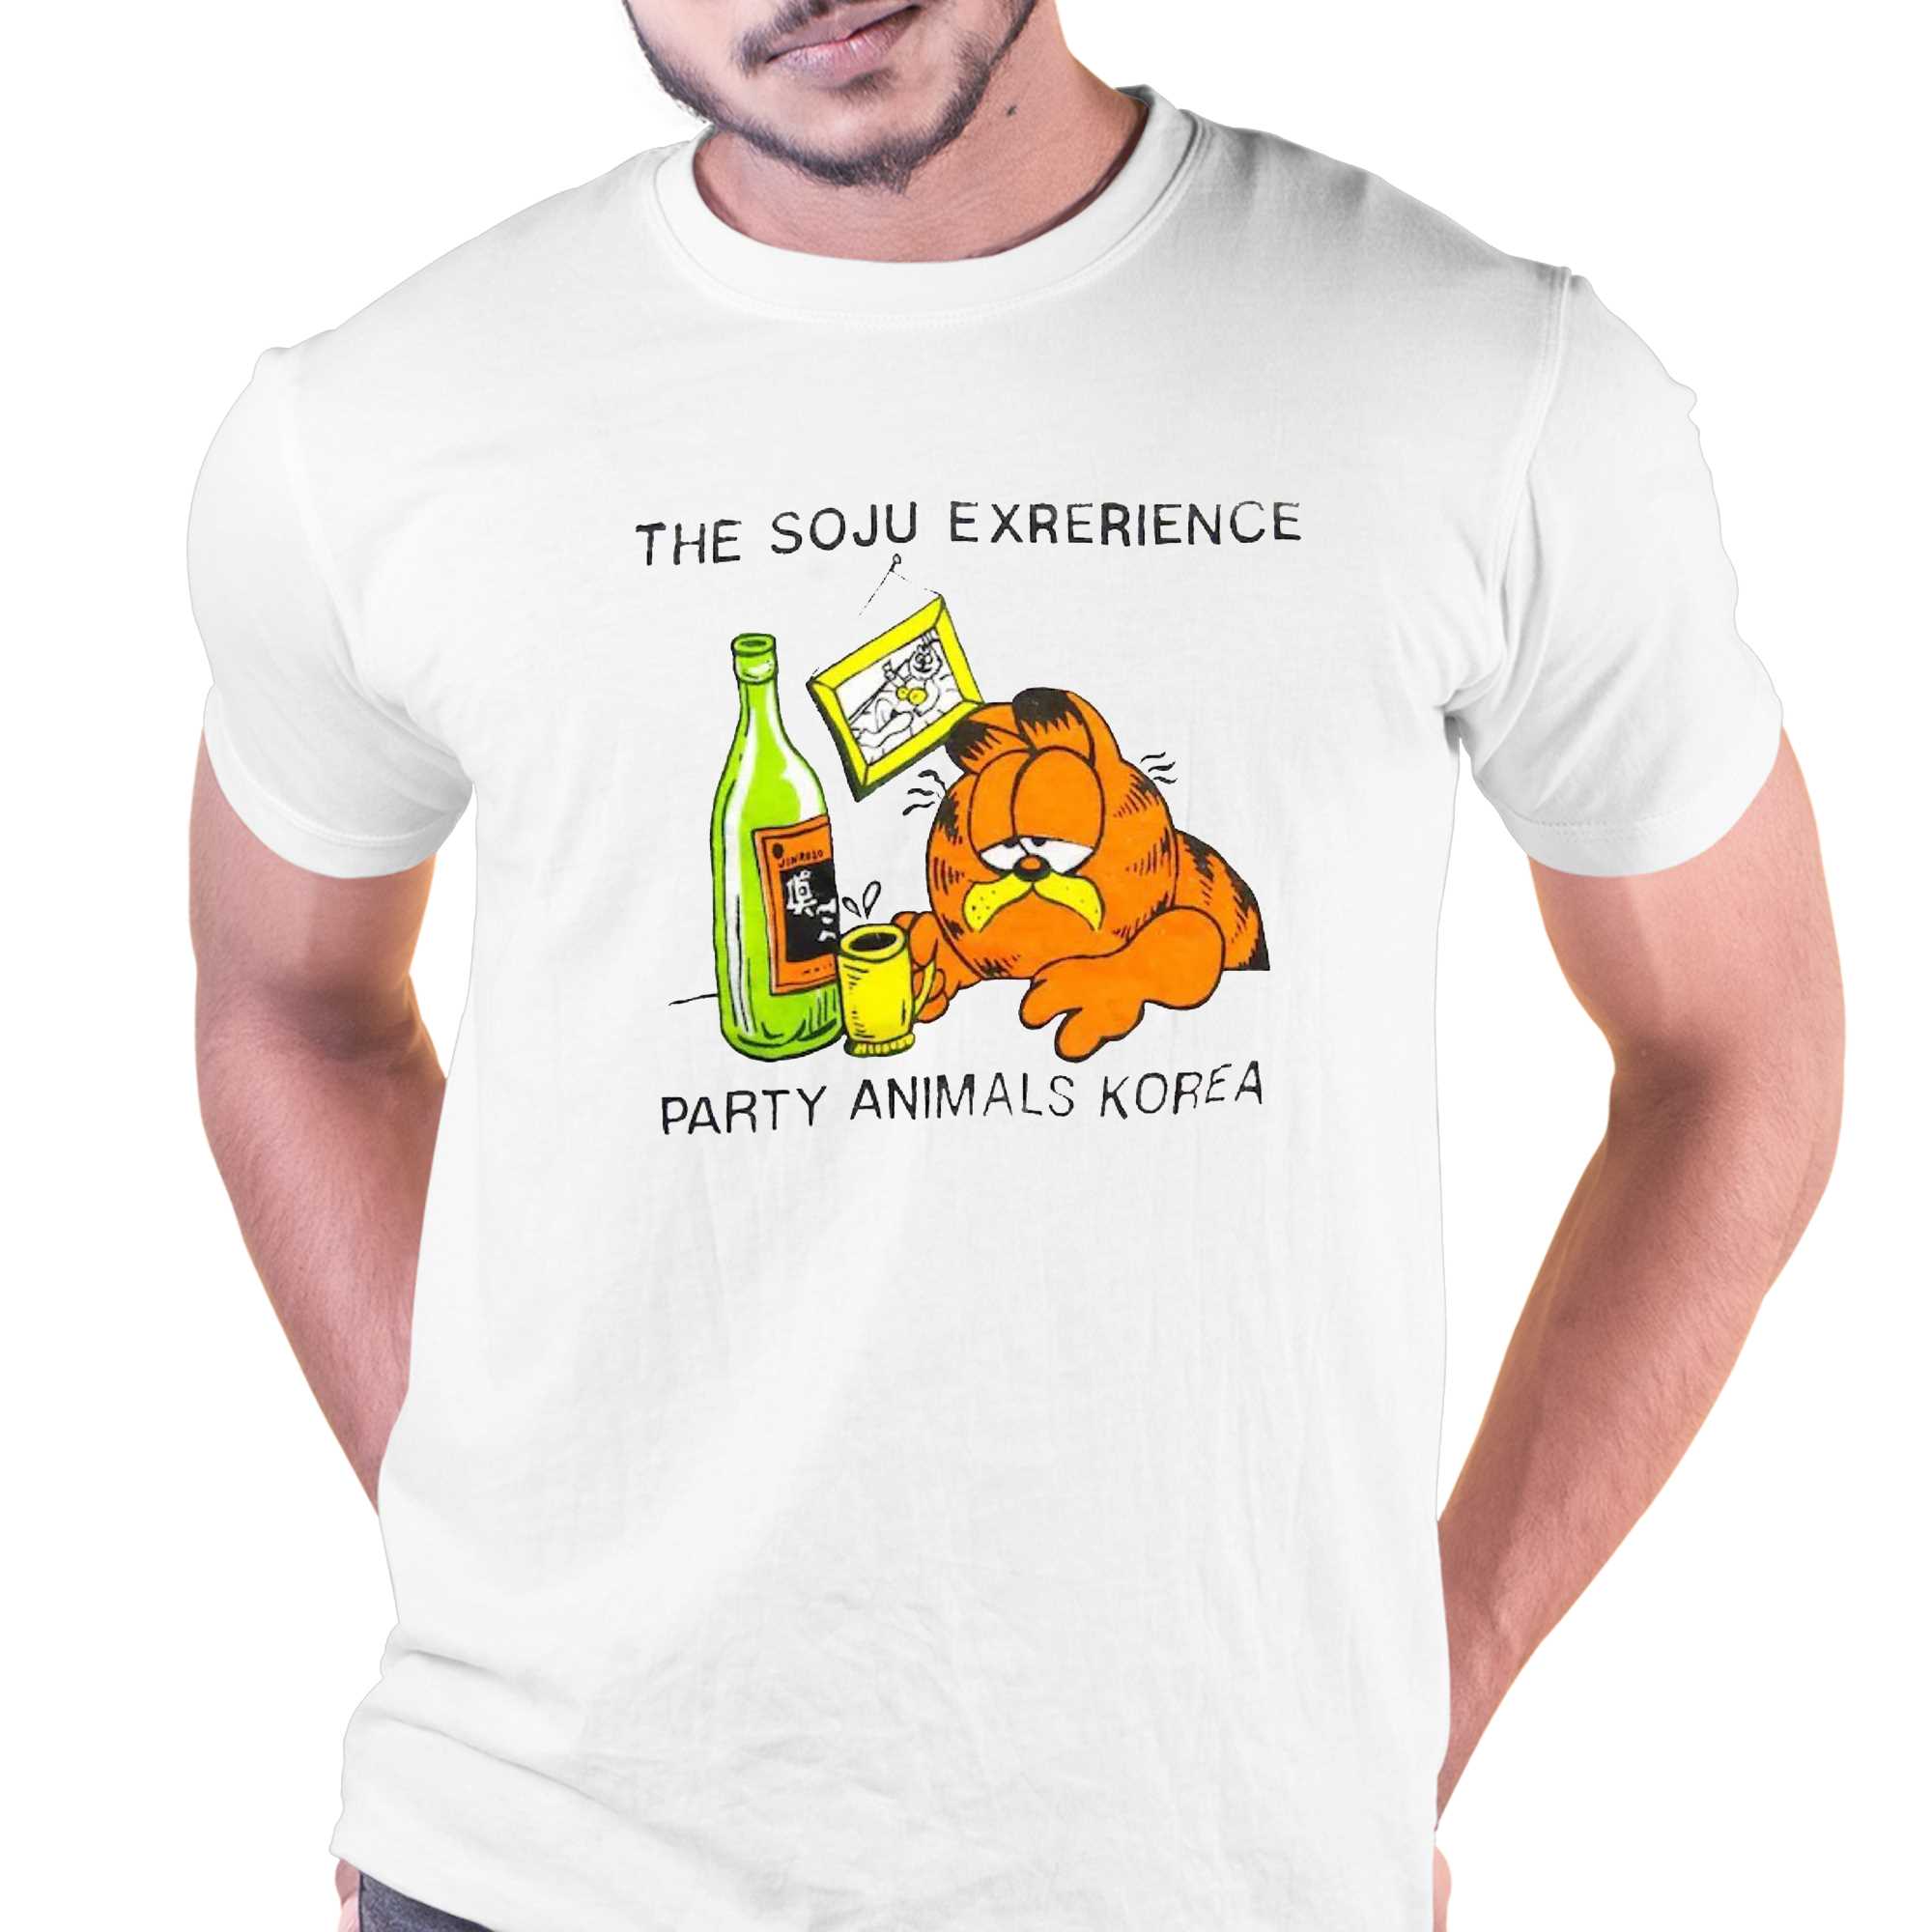 the soul experience party animals korea t shirt 1